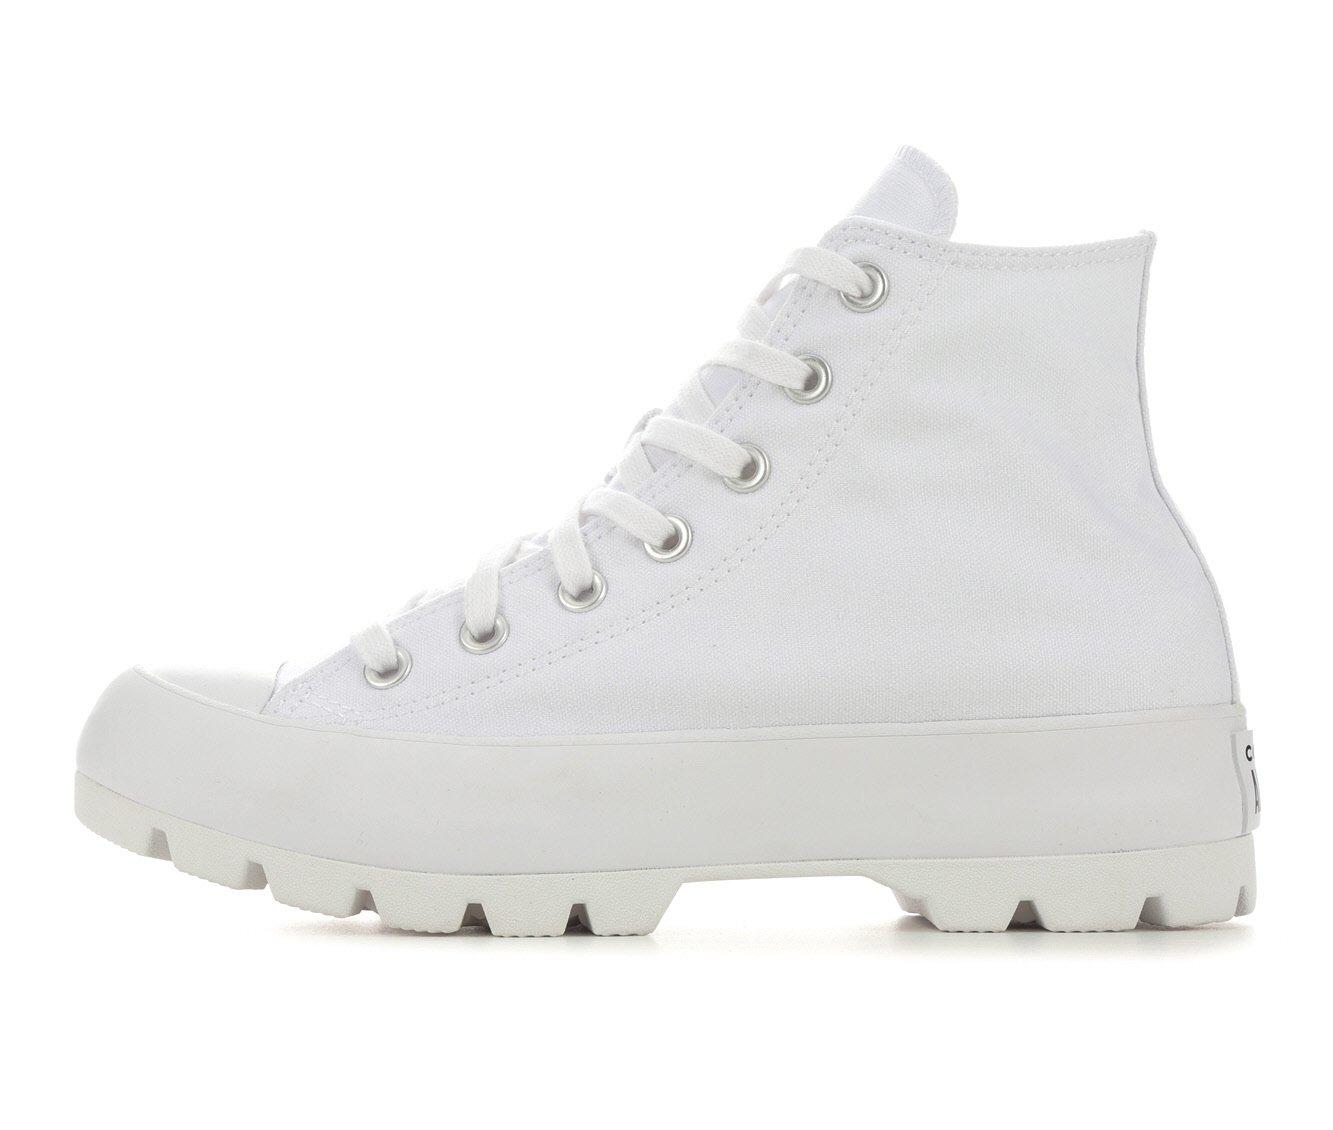 Converse Women's Chuck Taylor All Star Lugged High Top Sneakers